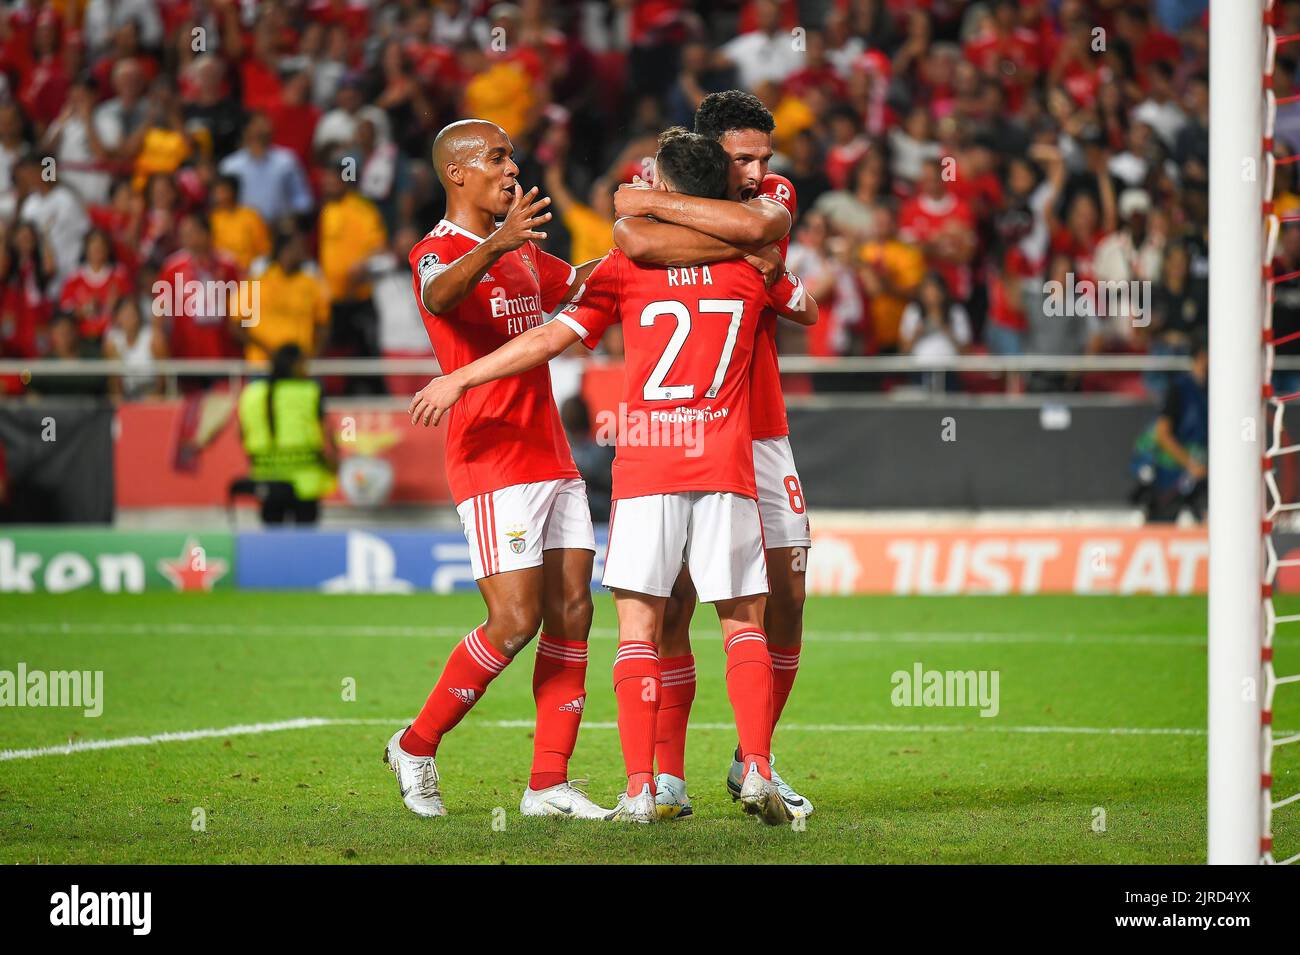 Lisbon, Portugal. 23rd Aug, 2022. Joao Mario from Benfica (L), Rafa Silva from Benfica (C) and Goncalo Ramos from Benfica (R) in action during UEFA Champions League Play-Offs 2nd Leg match between Benfica and Dynamo Kyiv at Estadio da Luz. Final score: Benfica 3:0 Dynamo Kyiv. (Photo by Bruno de Carvalho/SOPA Images/Sipa USA) Credit: Sipa USA/Alamy Live News Stock Photo